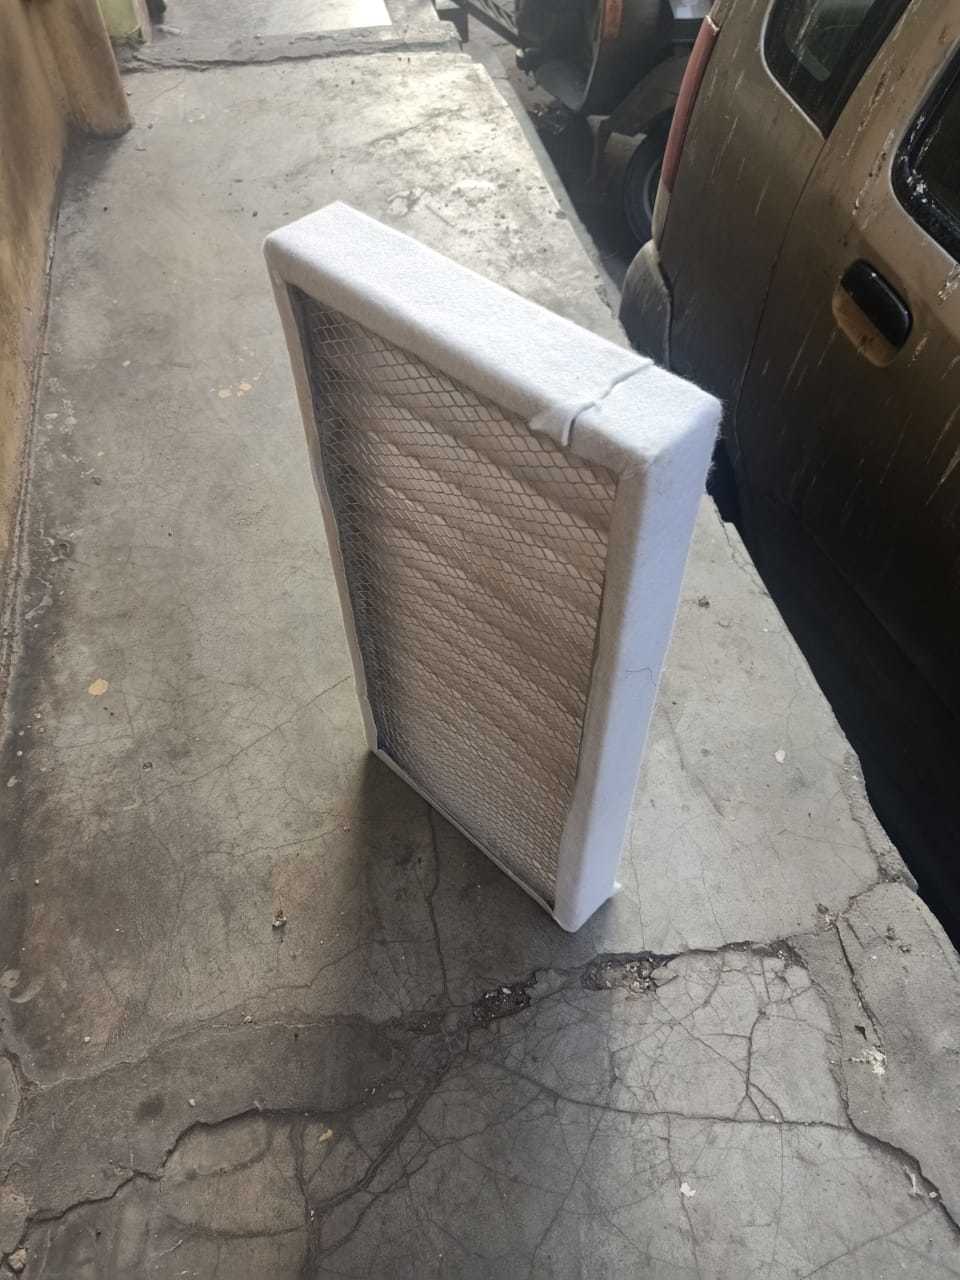 Air Filter For DC Motor Blower